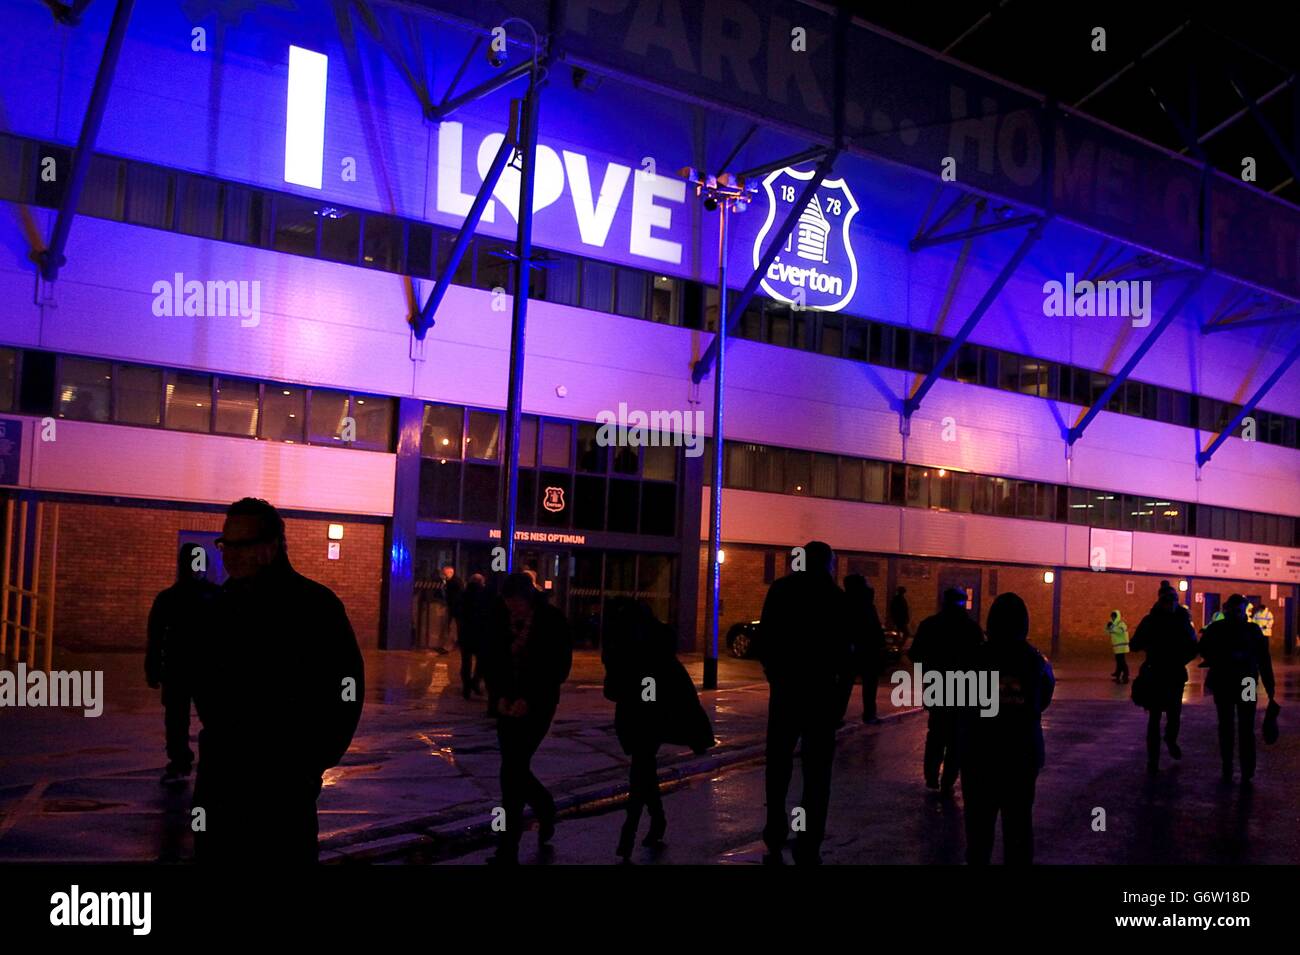 Soccer - Barclays Premier League - Everton v Crystal Palace - Goodison Park. An I Love Everton sign projected onto the side of the stand, before the game Stock Photo